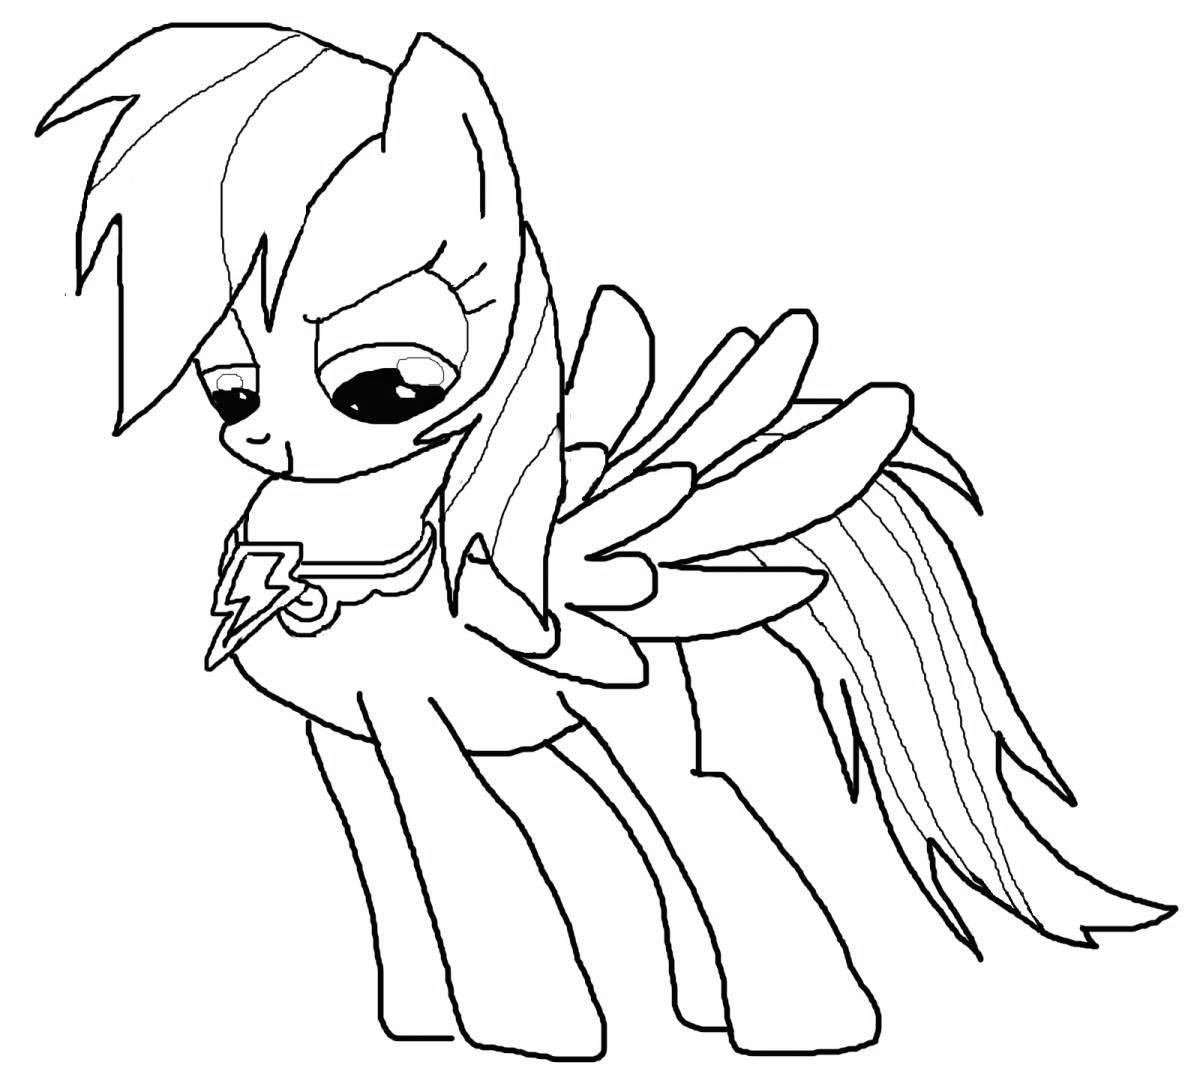 Glowing rainbow dash coloring page